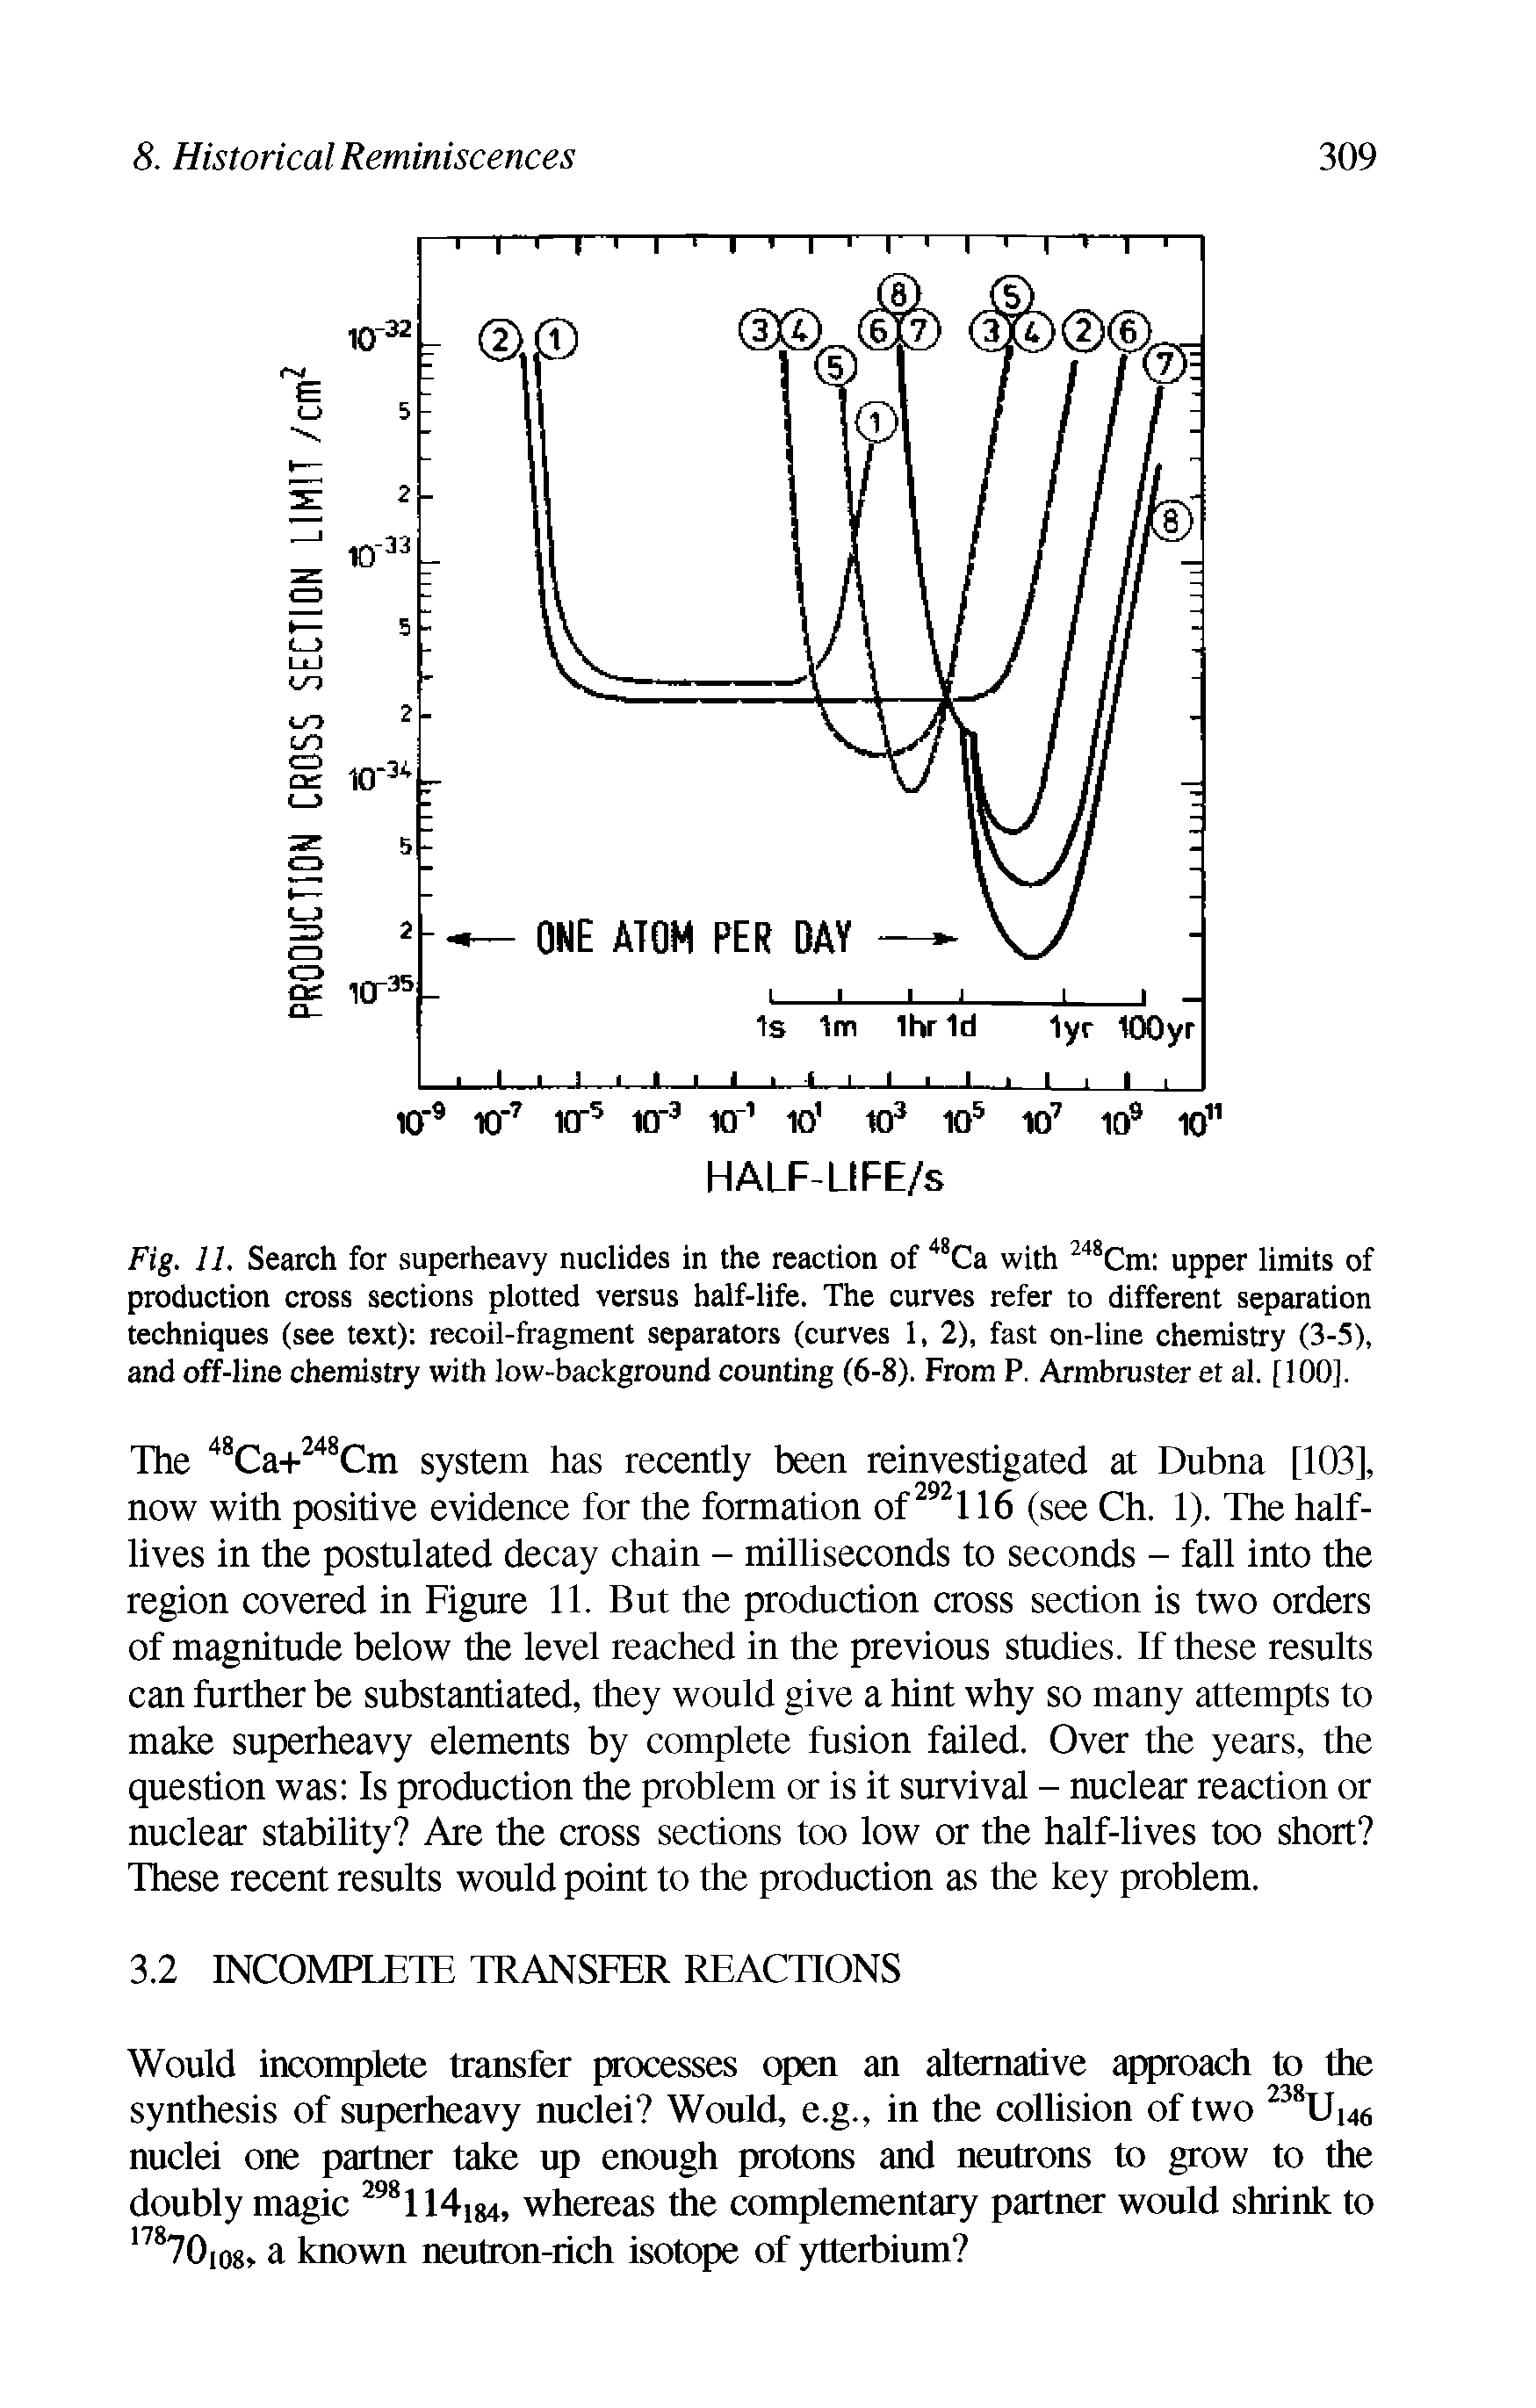 Fig. 11. Search for superheavy nuclides in the reaction of 48Ca with 248Cm upper limits of production cross sections plotted versus half-life. The curves refer to different separation techniques (see text) recoil-fragment separators (curves 1, 2), fast on-line chemistry (3-5), and off-line chemistry with low-background counting (6-8). From P. Armbruster et al. [100].